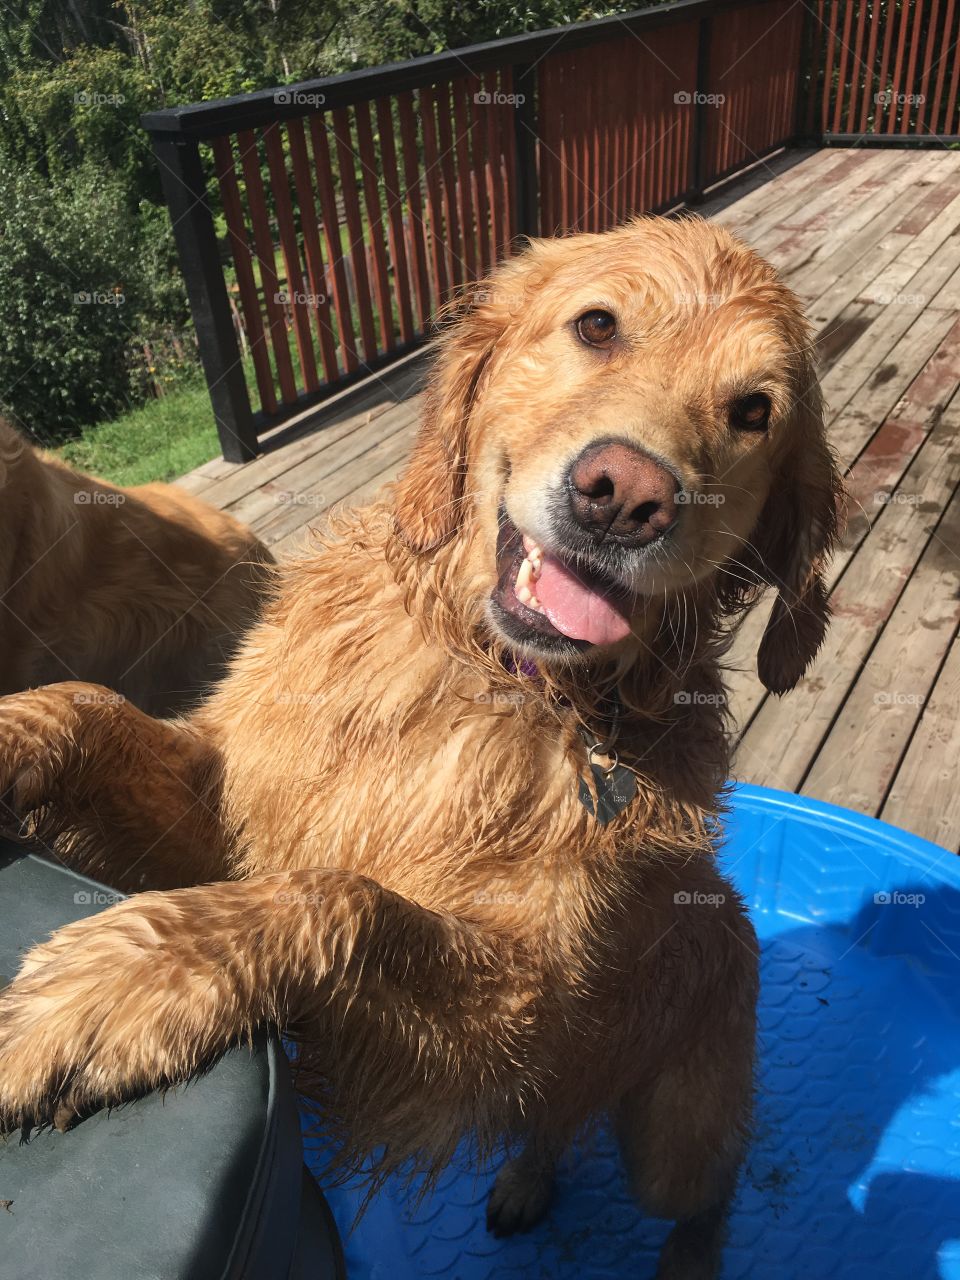 A wet golden retriever dog smiles with its paws up on an elevated surface, standing in a small pool